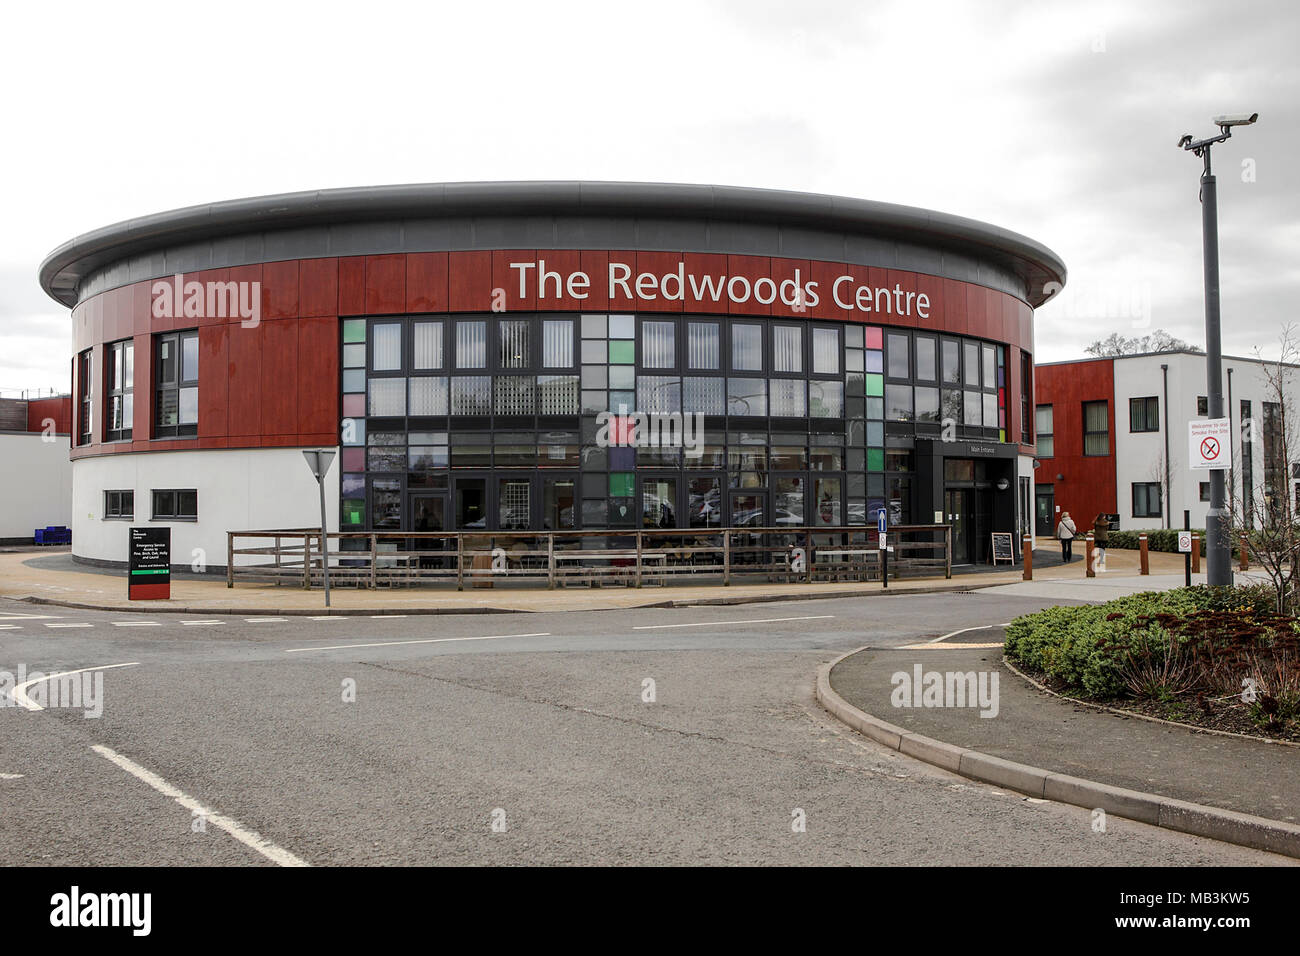 One of (20) images in this short set related to various retail, private and NHS properties in the Shrewsbury area. The Redwoods Centre near Oxon. Stock Photo